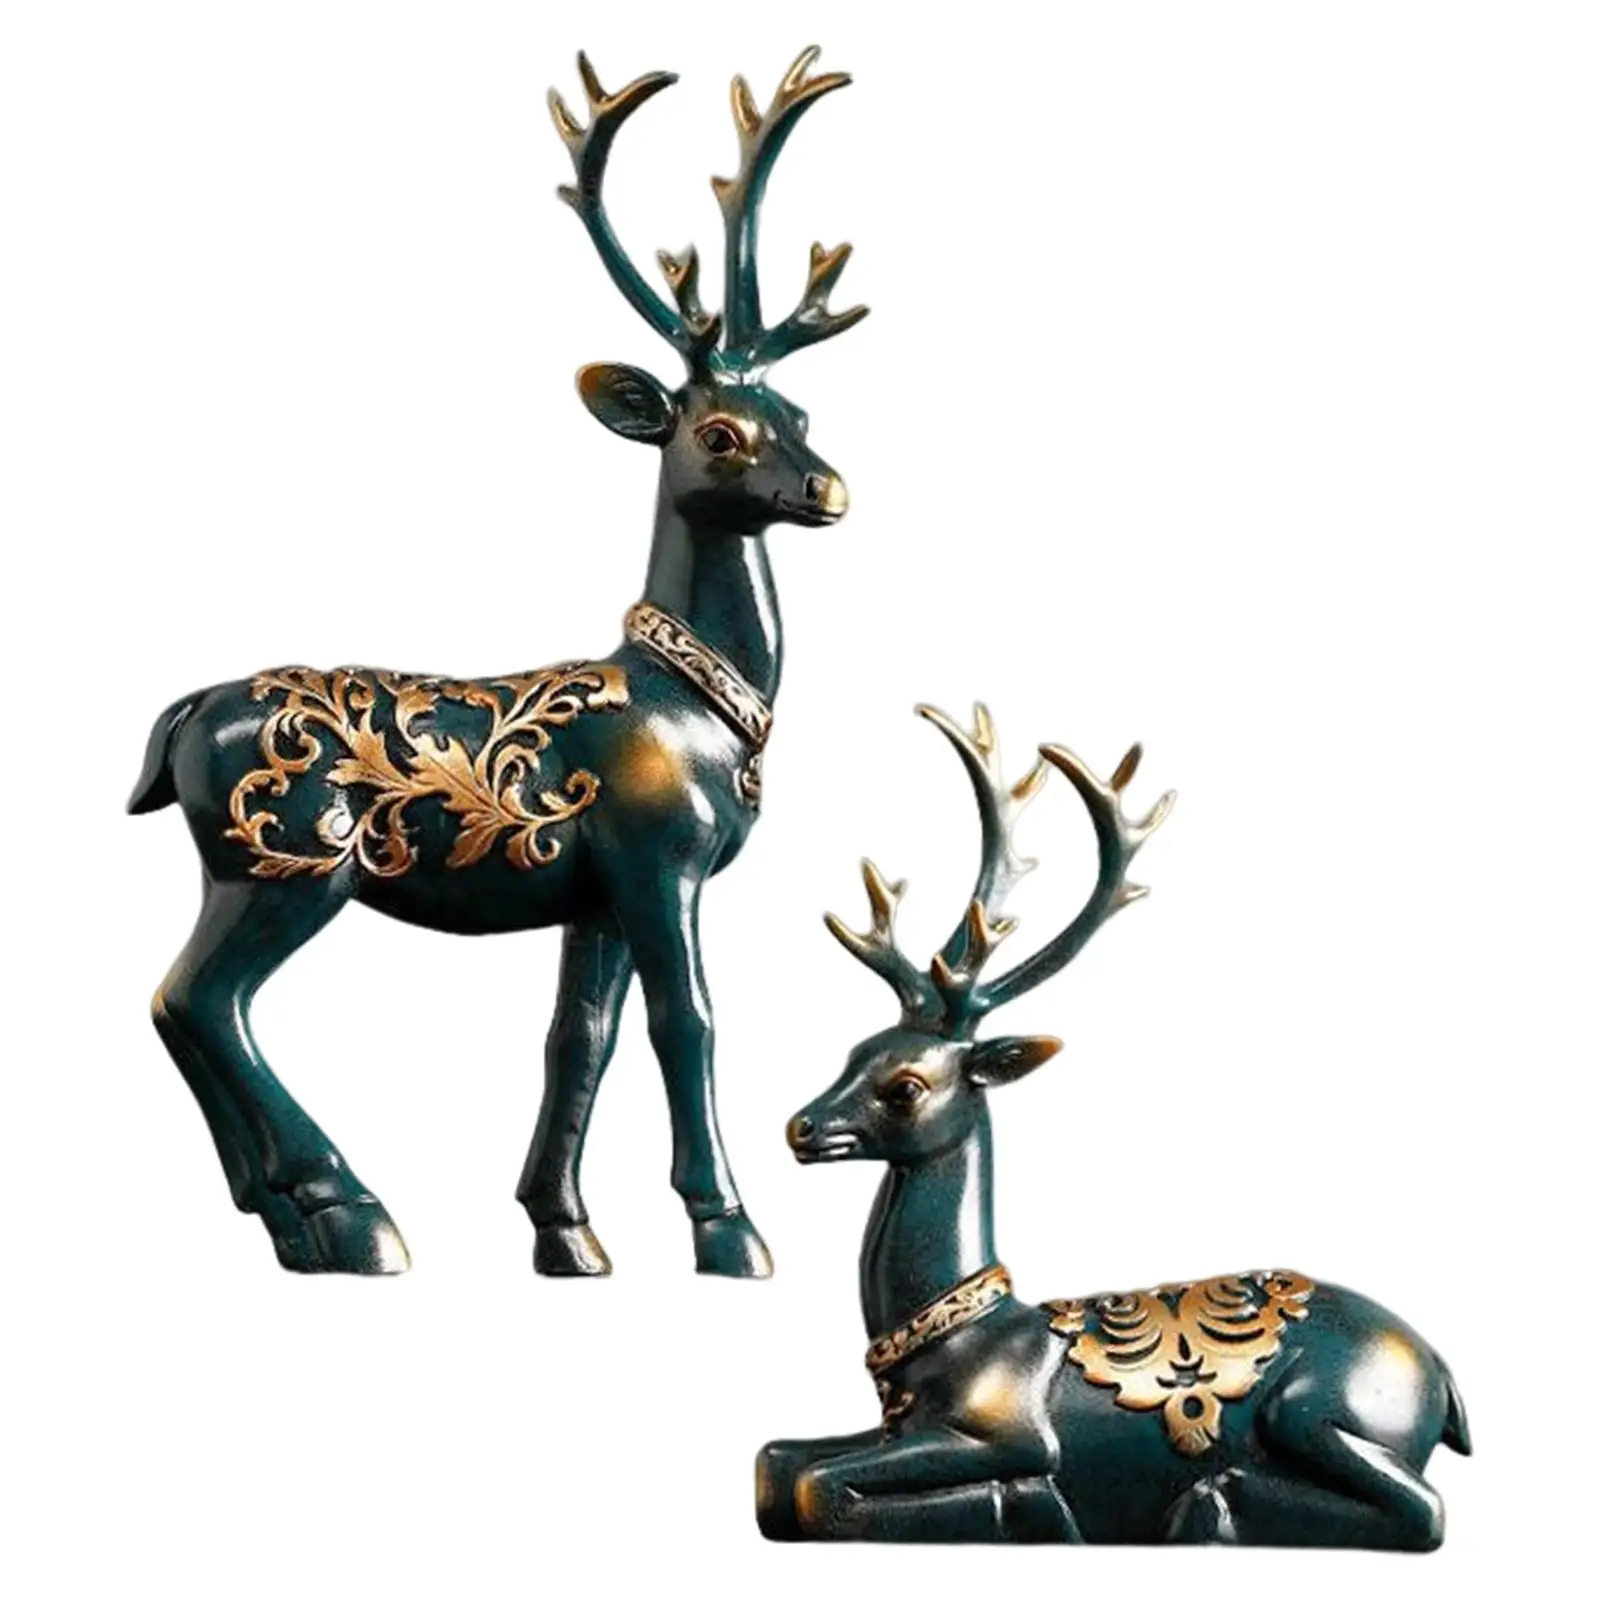 

Nordic Style Deer Statue Decoration Art Forest Reindeer Figurines Gifts Ornament Crafts for Living Room Bathroom Car Office Cafe